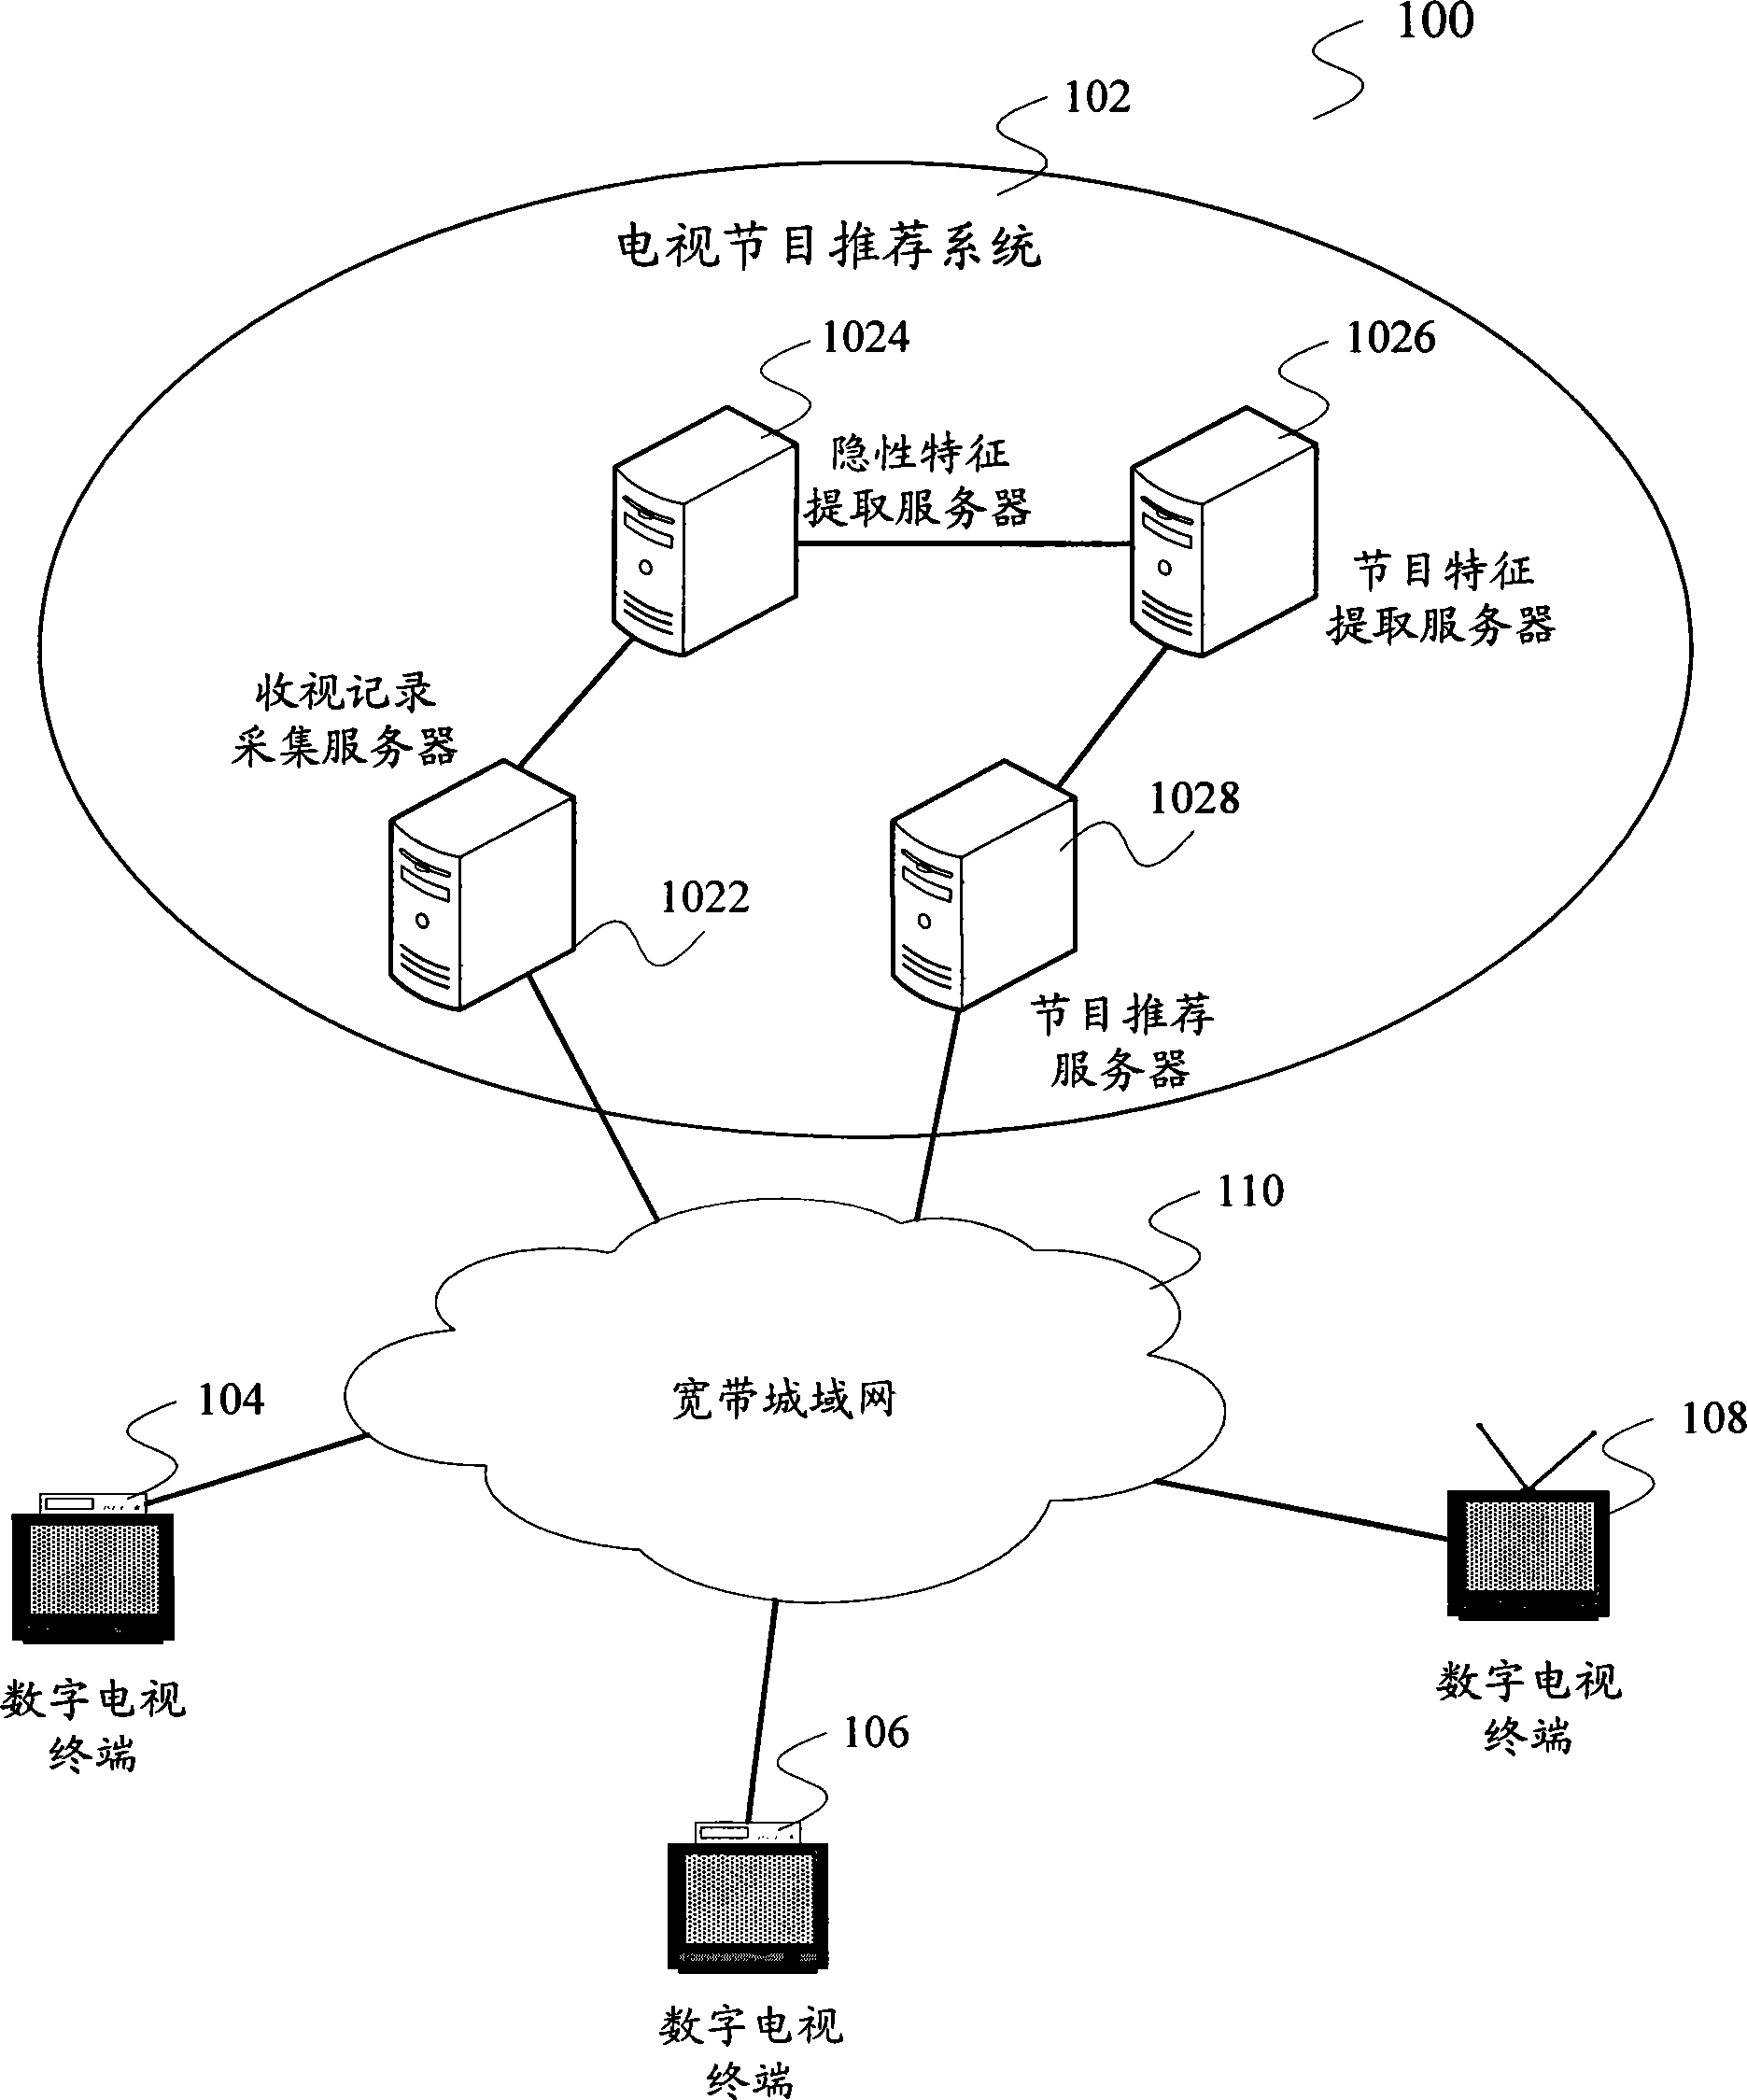 Hidden customer characteristic extracting method and television program recommendation method and system